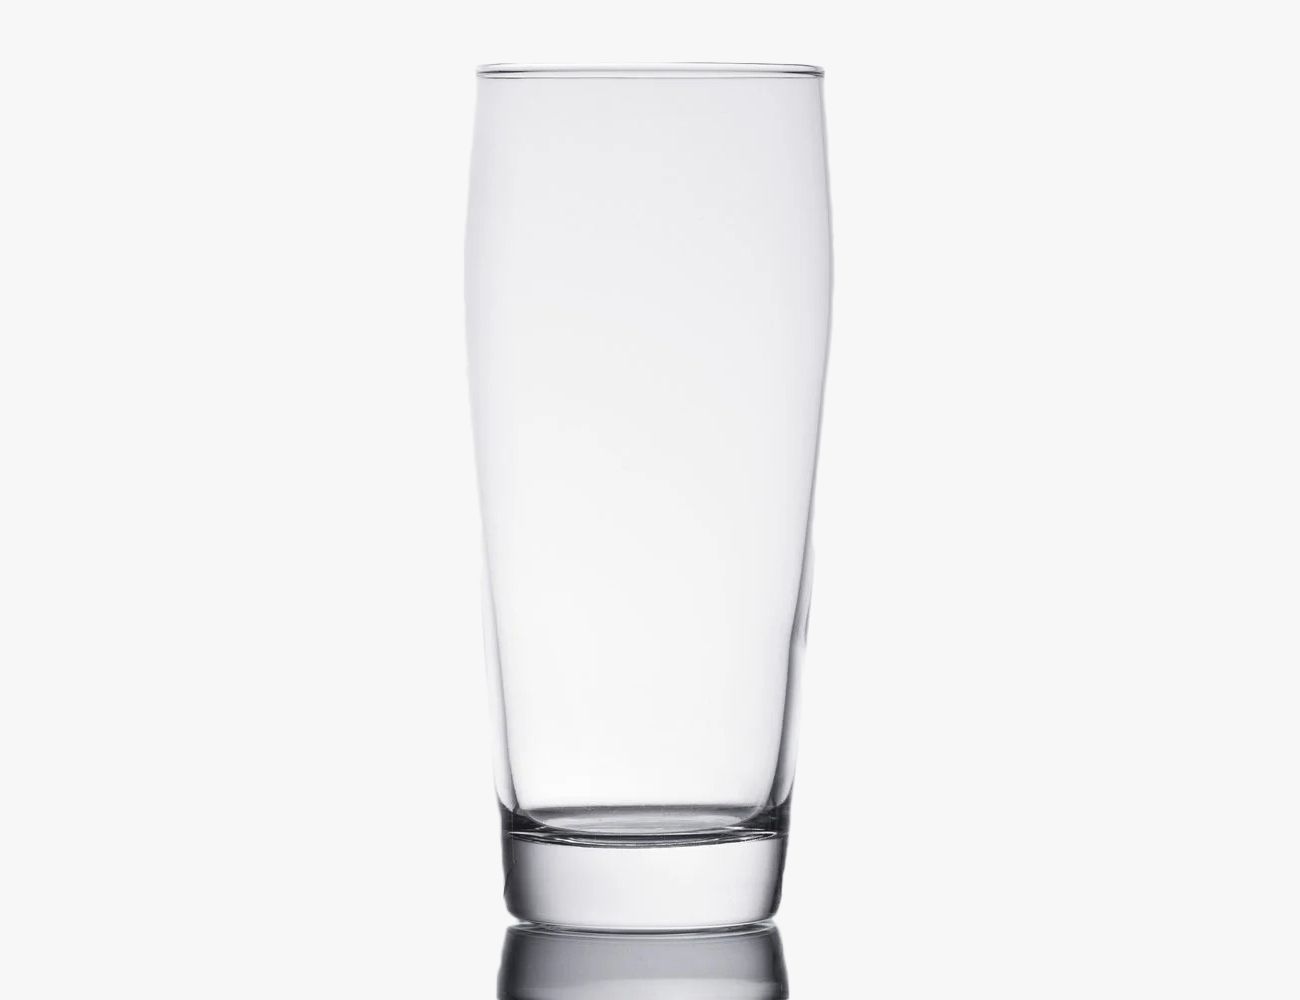 Top 13 Types of Beer Glasses: A Buying Guide